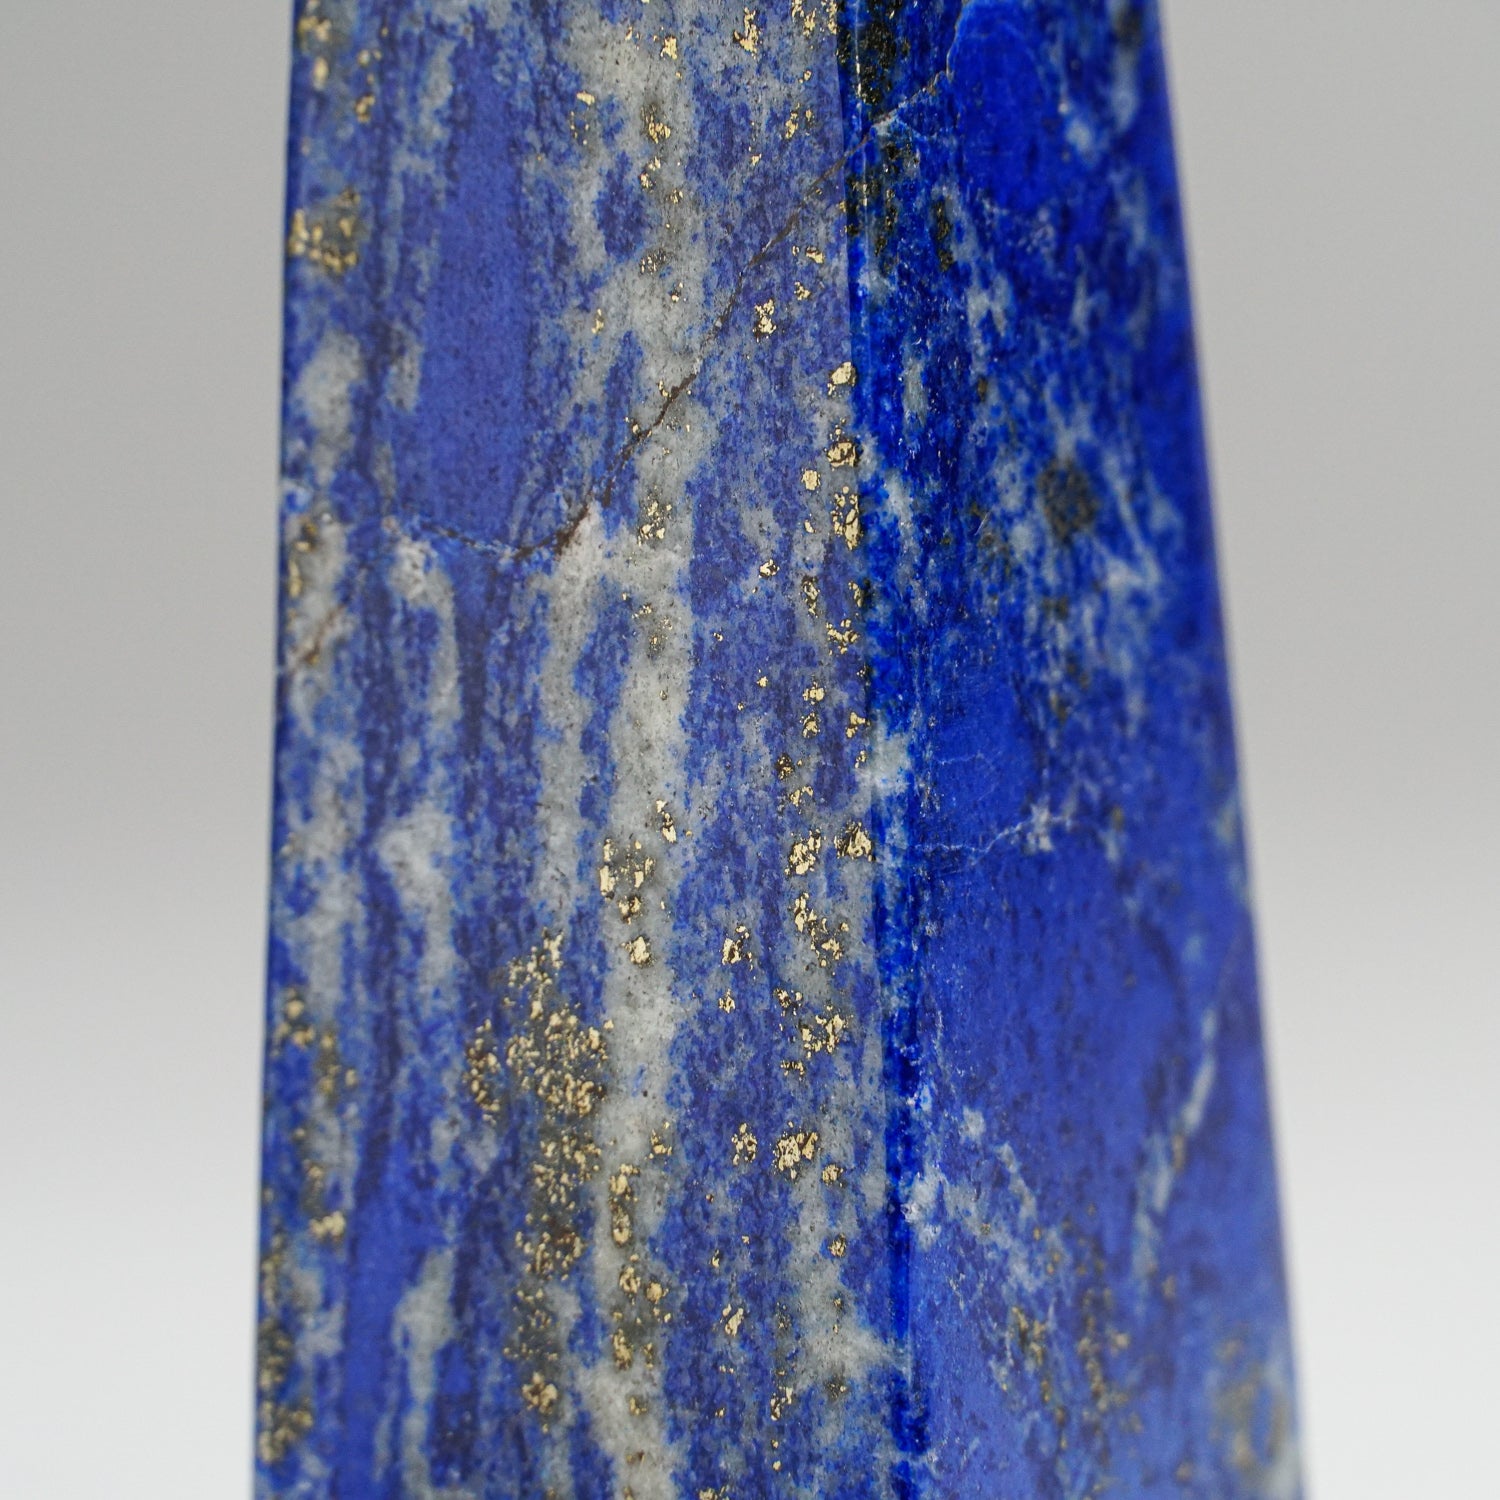 Polished Lapis Lazuli Point from Afghanistan (237 grams)